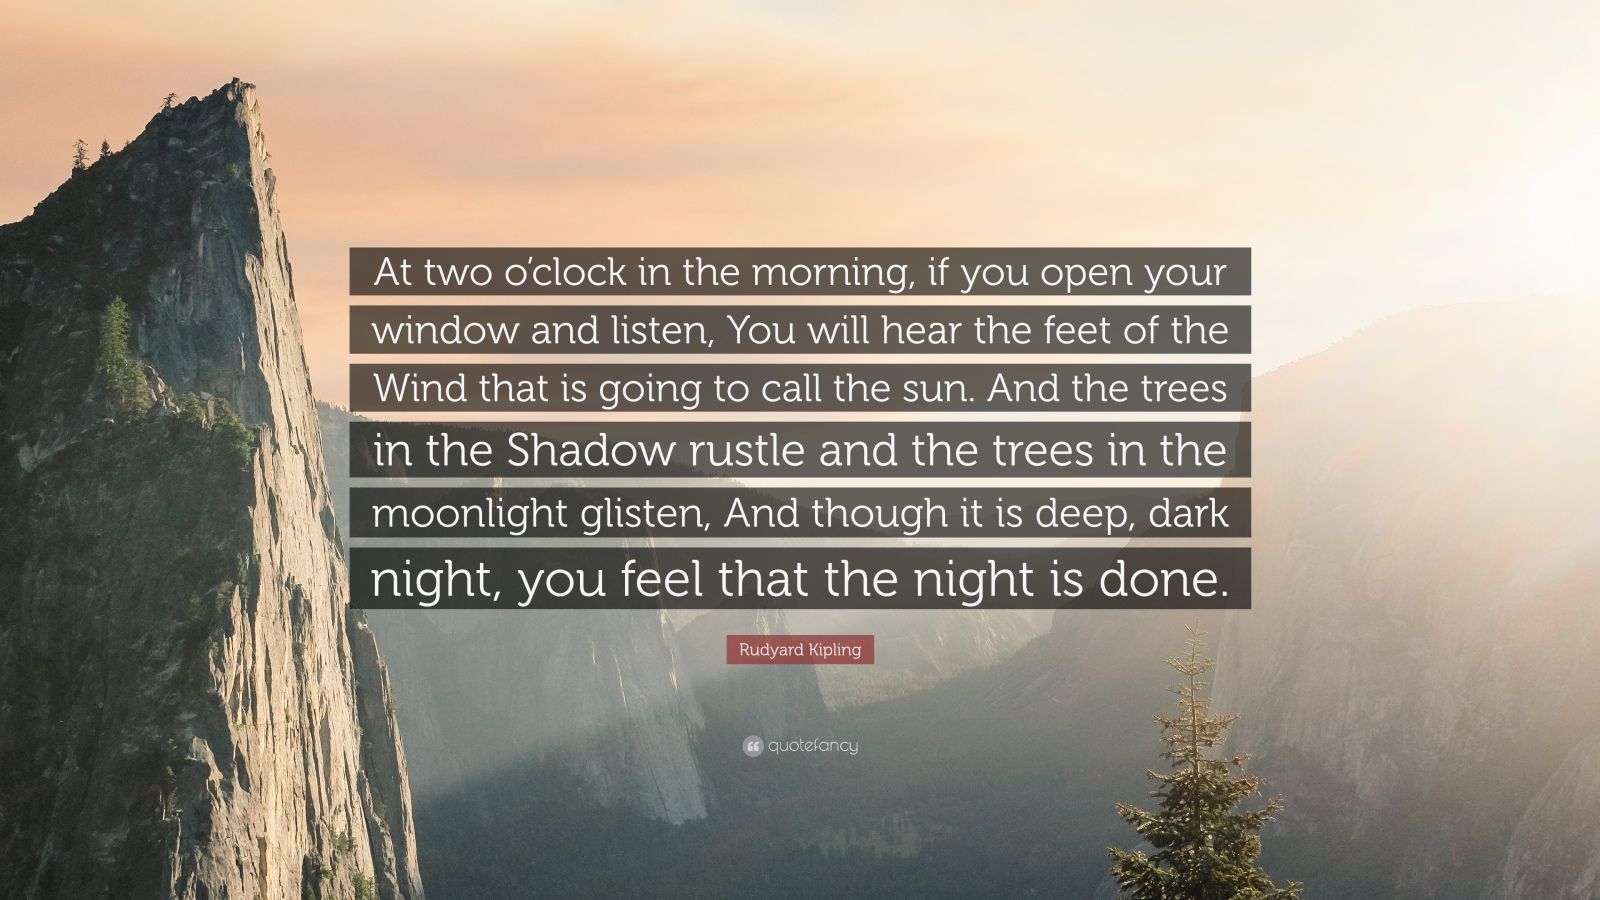 Rudyard Kipling Quote: “At two o'clock in the morning, if you open your  window and listen, You will hear the feet of the Wind that is going to c...”